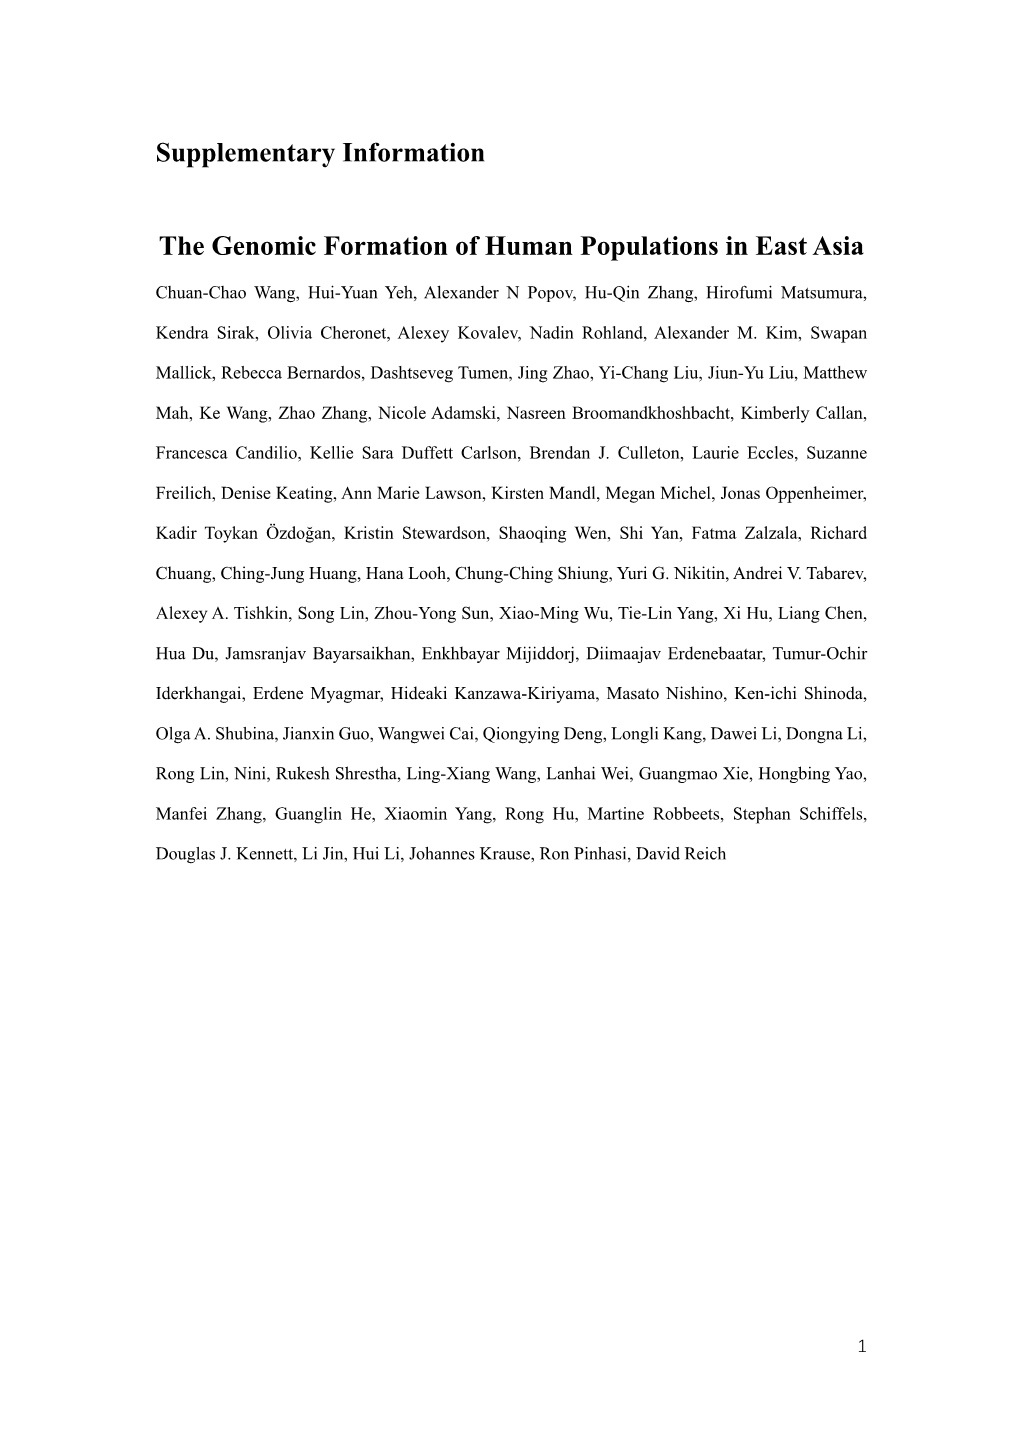 Supplementary Information the Genomic Formation of Human